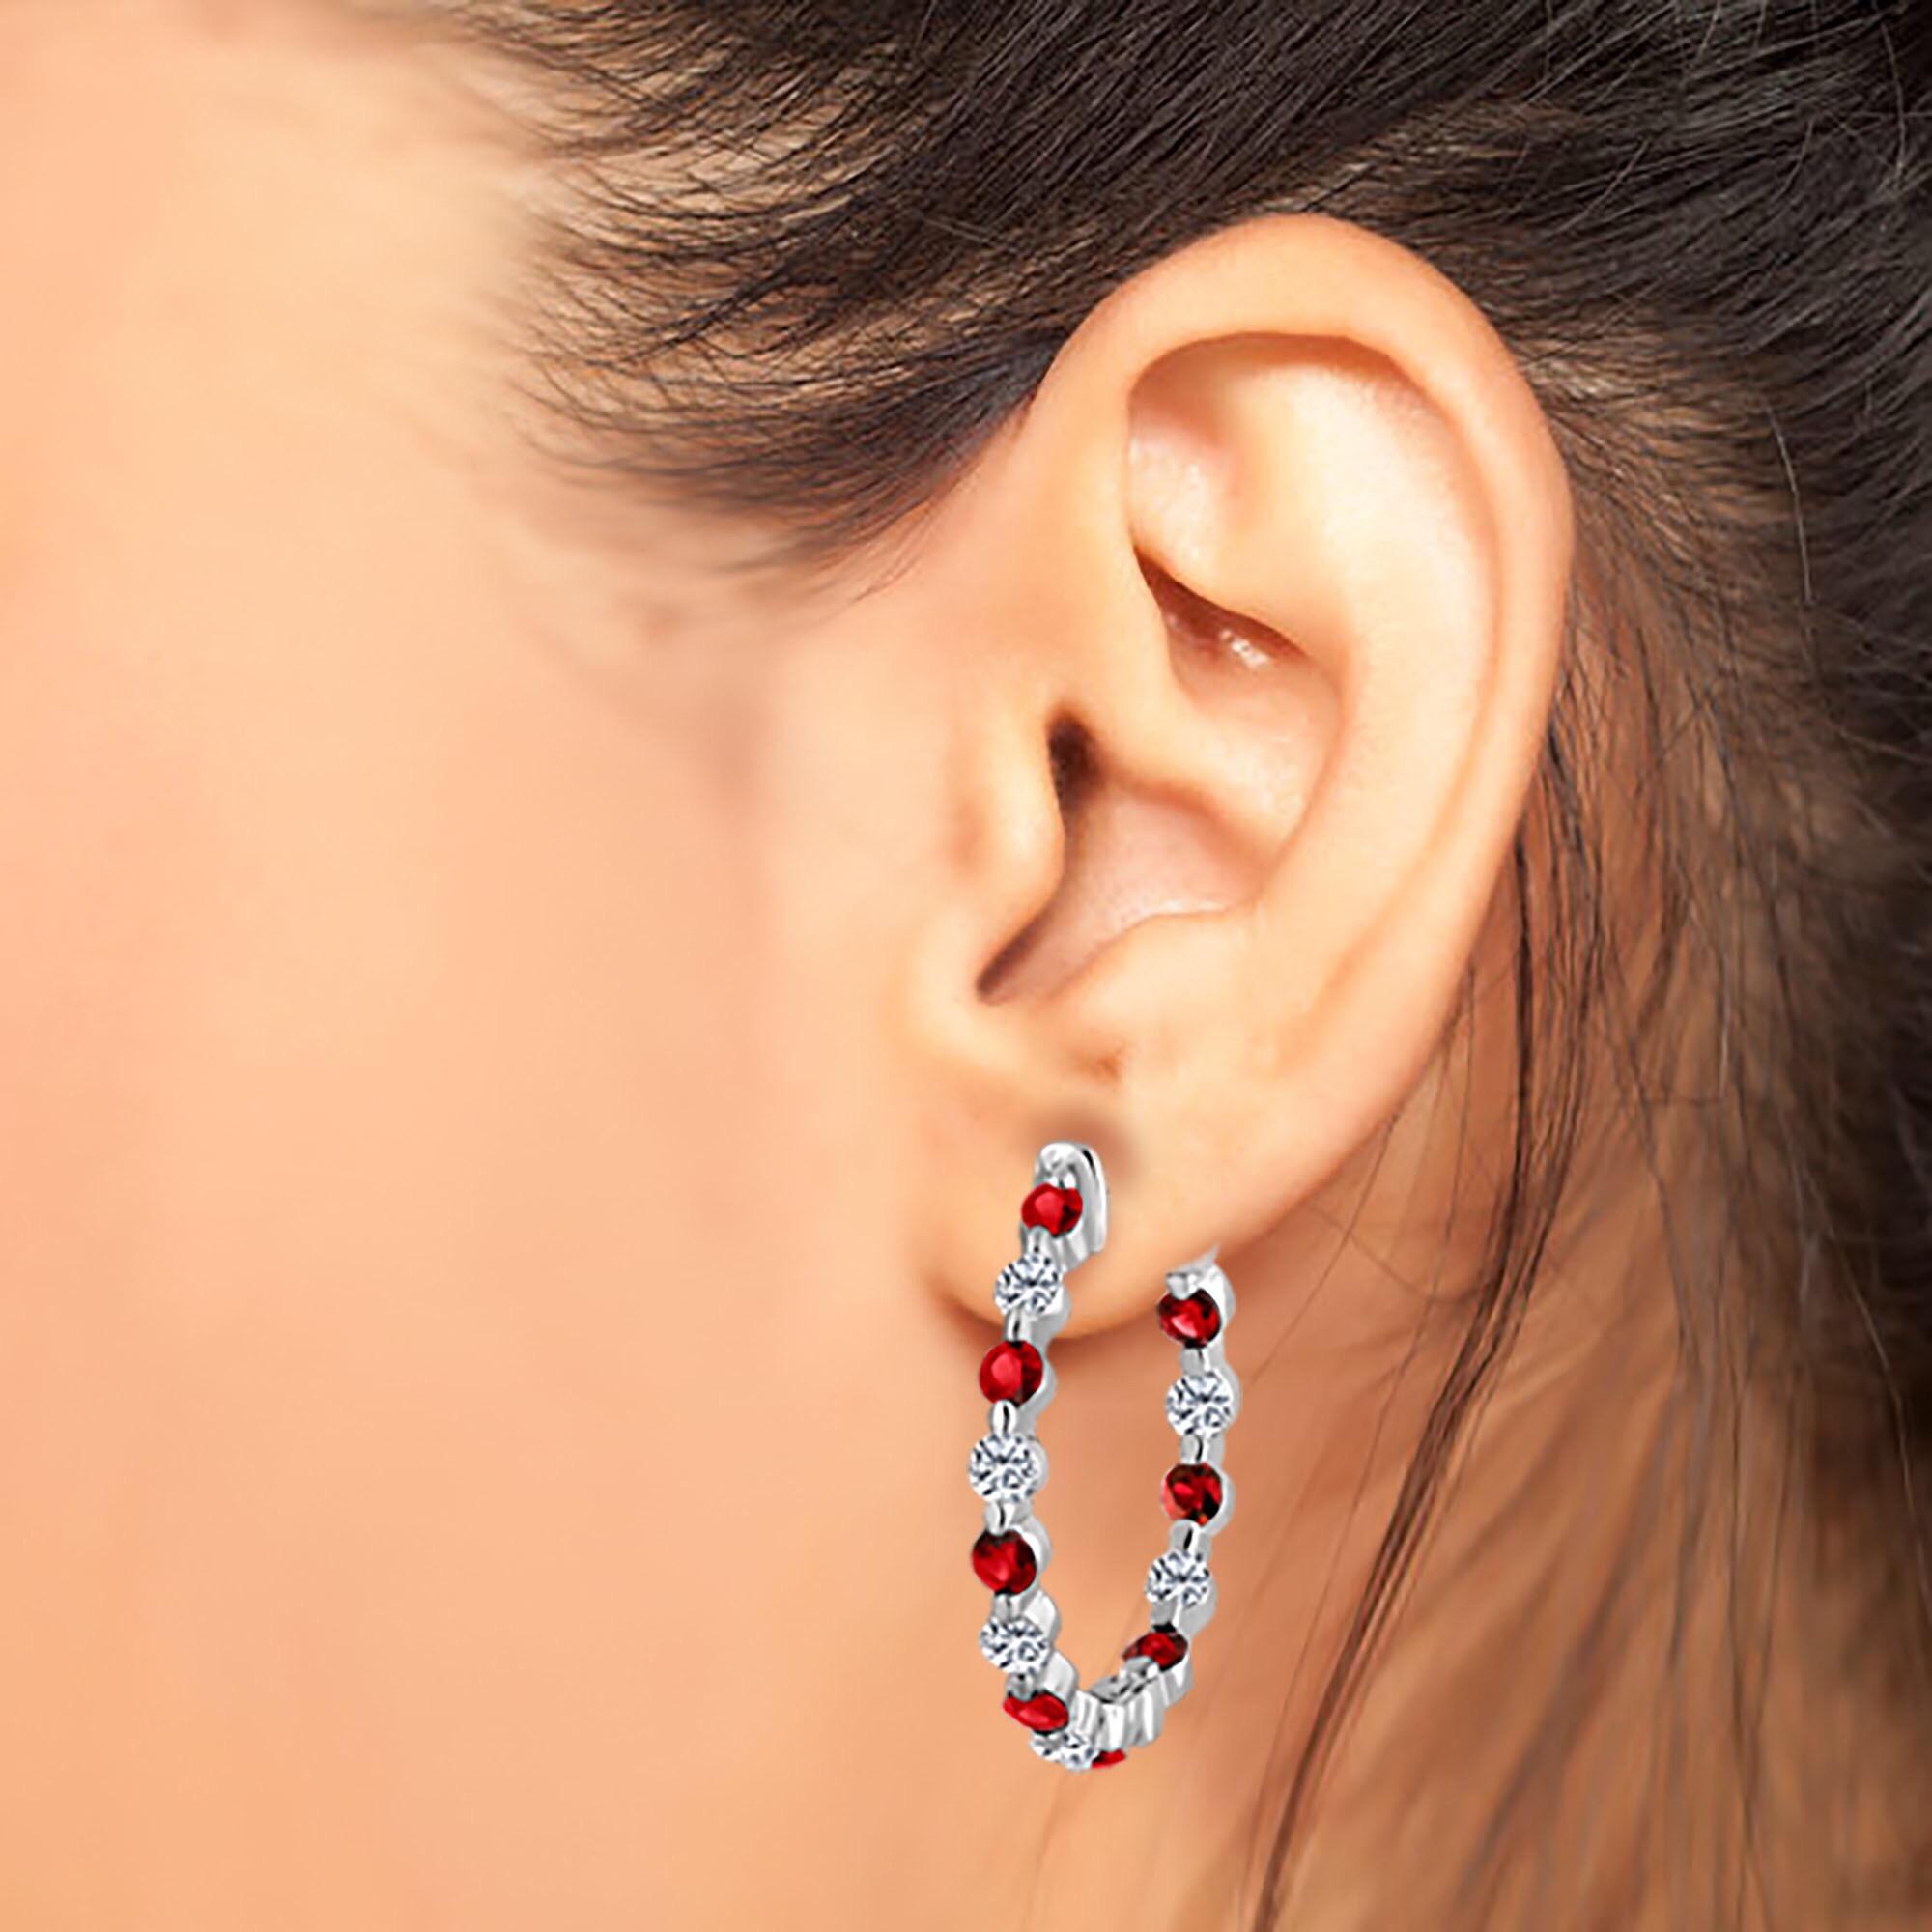 Please Call our direct line 6468461904 8am-11pm daily closed on Saturdays 
Approx total weight: 2.20cts
Gorgeous deep red Rubies set with white diamonds. The width of the hoop measures about 3.10mm
Metal: 18kw
Diamond Color: E-F 
Diamond Clarity: